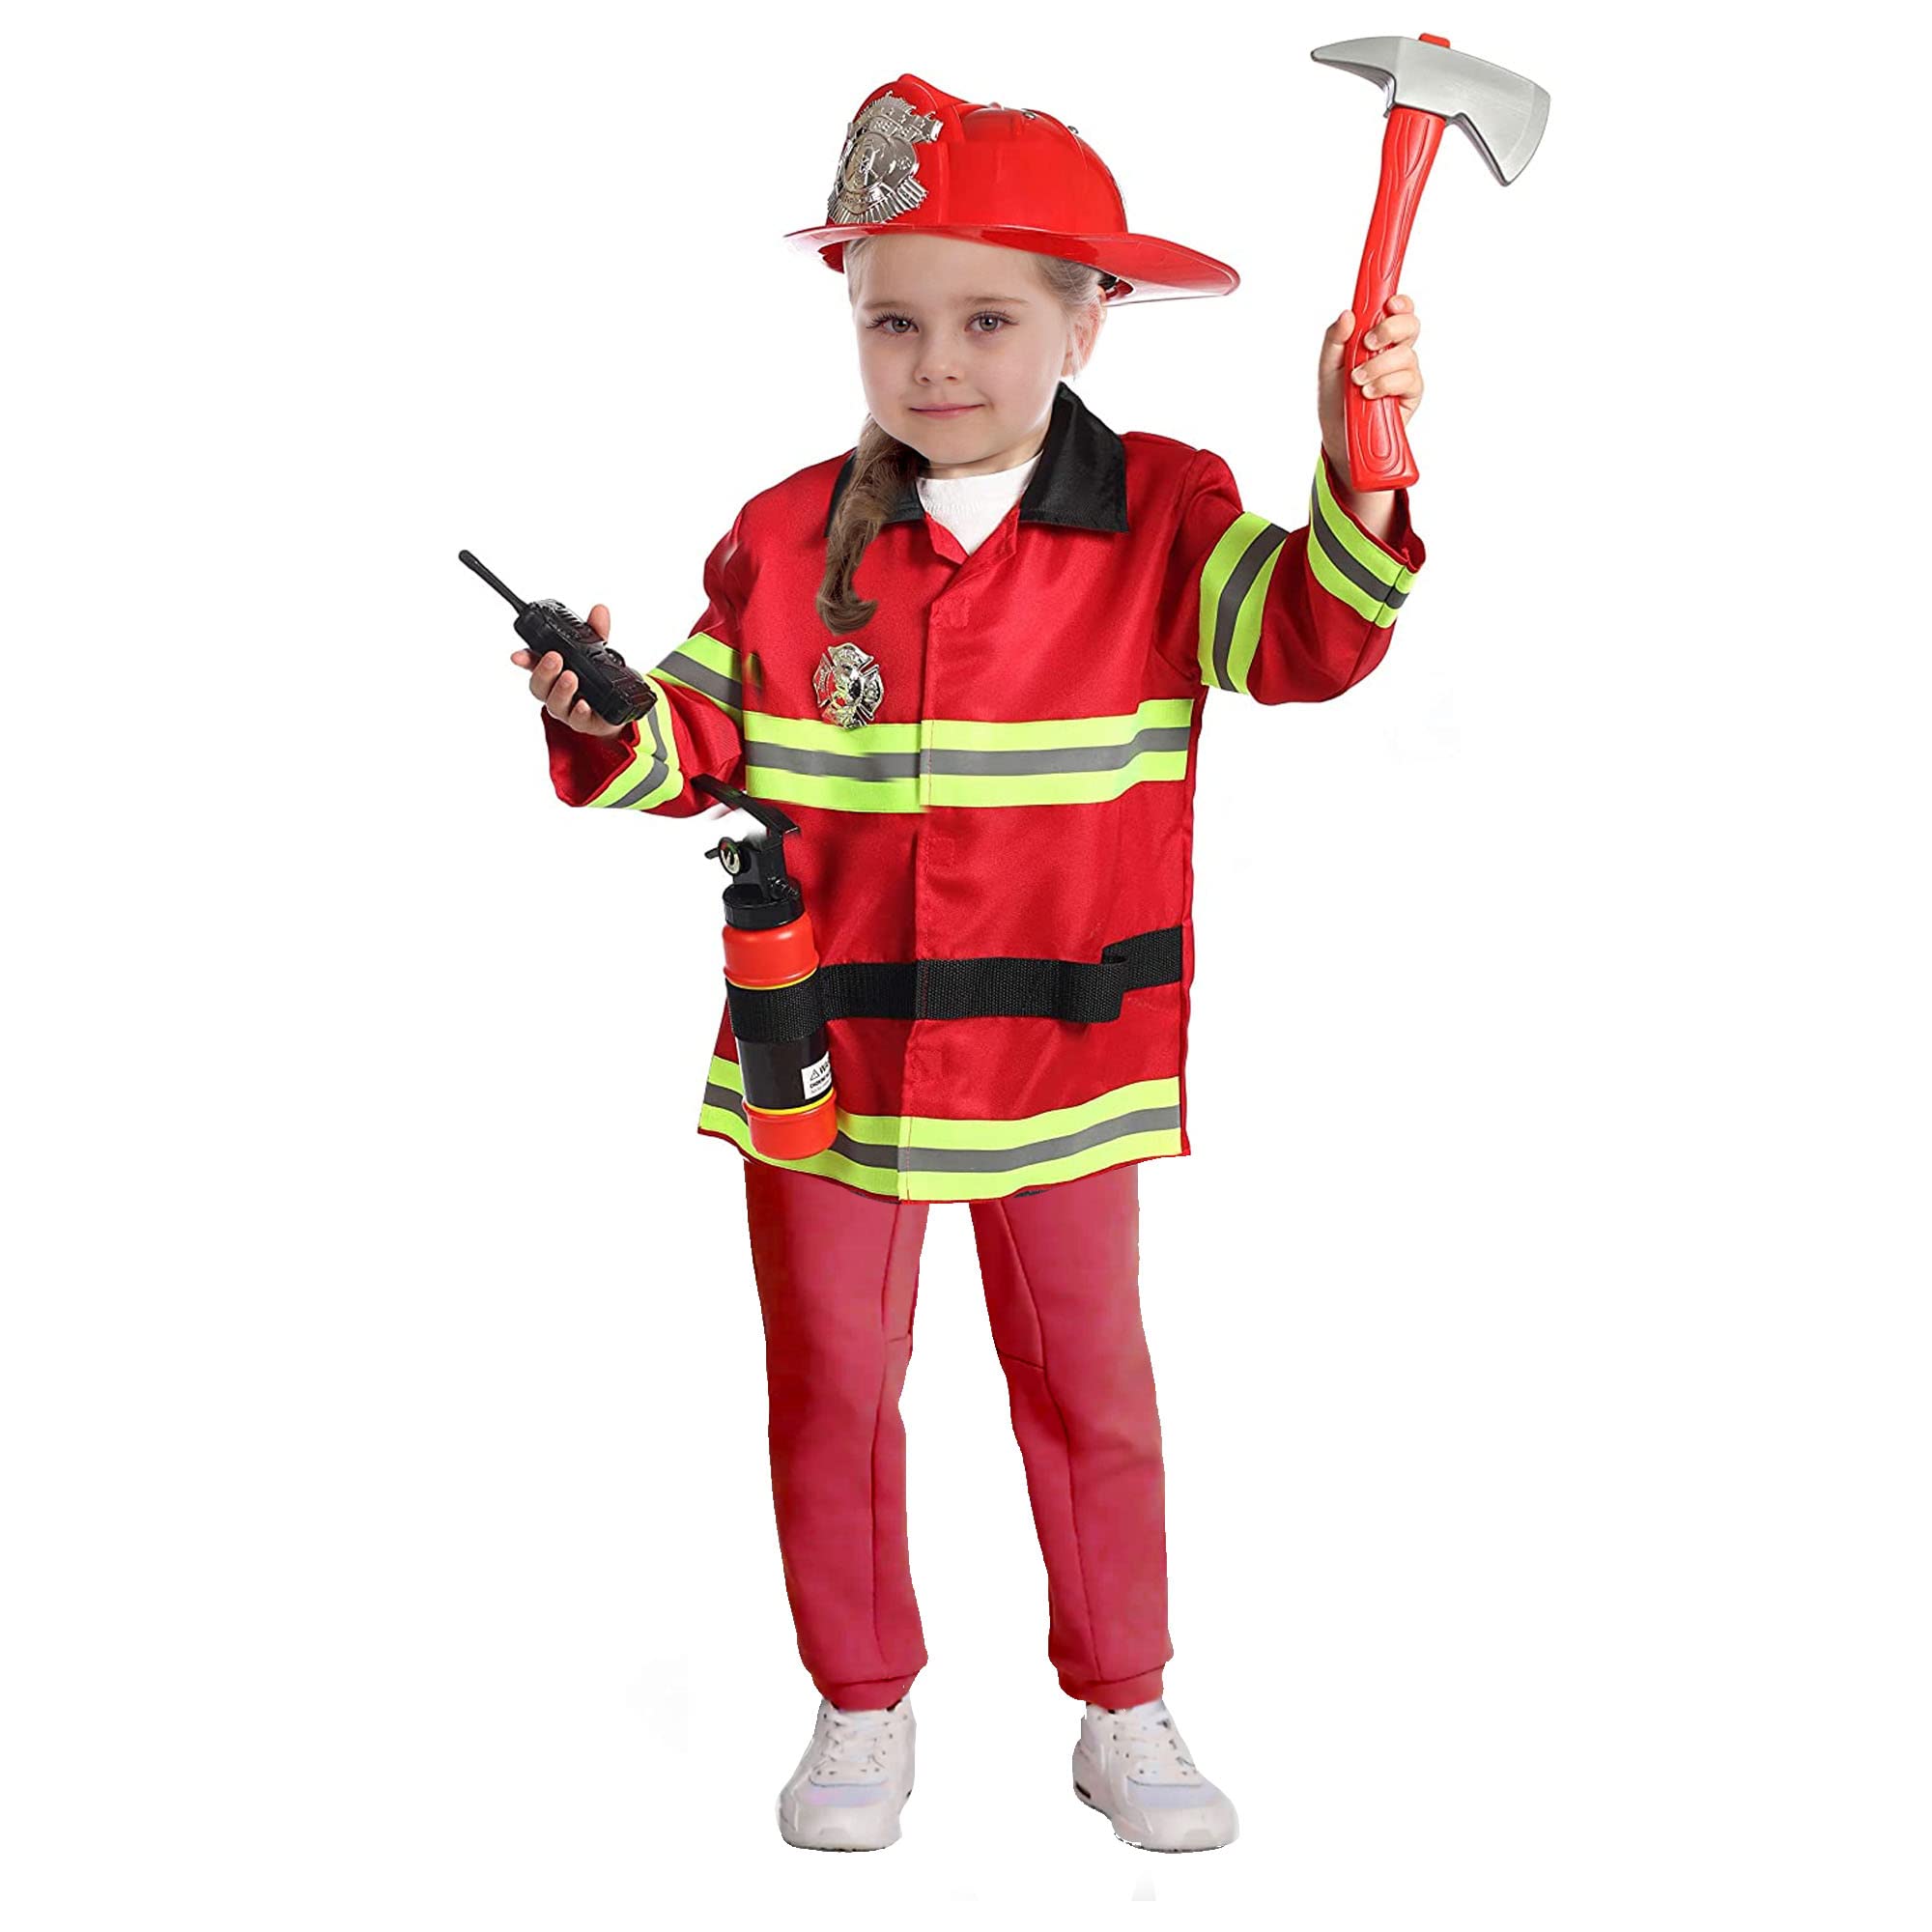 Firefighter Costume for Kids, Toddler Dress Up Costumes, Pretend Play Fireman Costume for Kids with Firefighter Gear, For Boys and Girls Ages 3-7